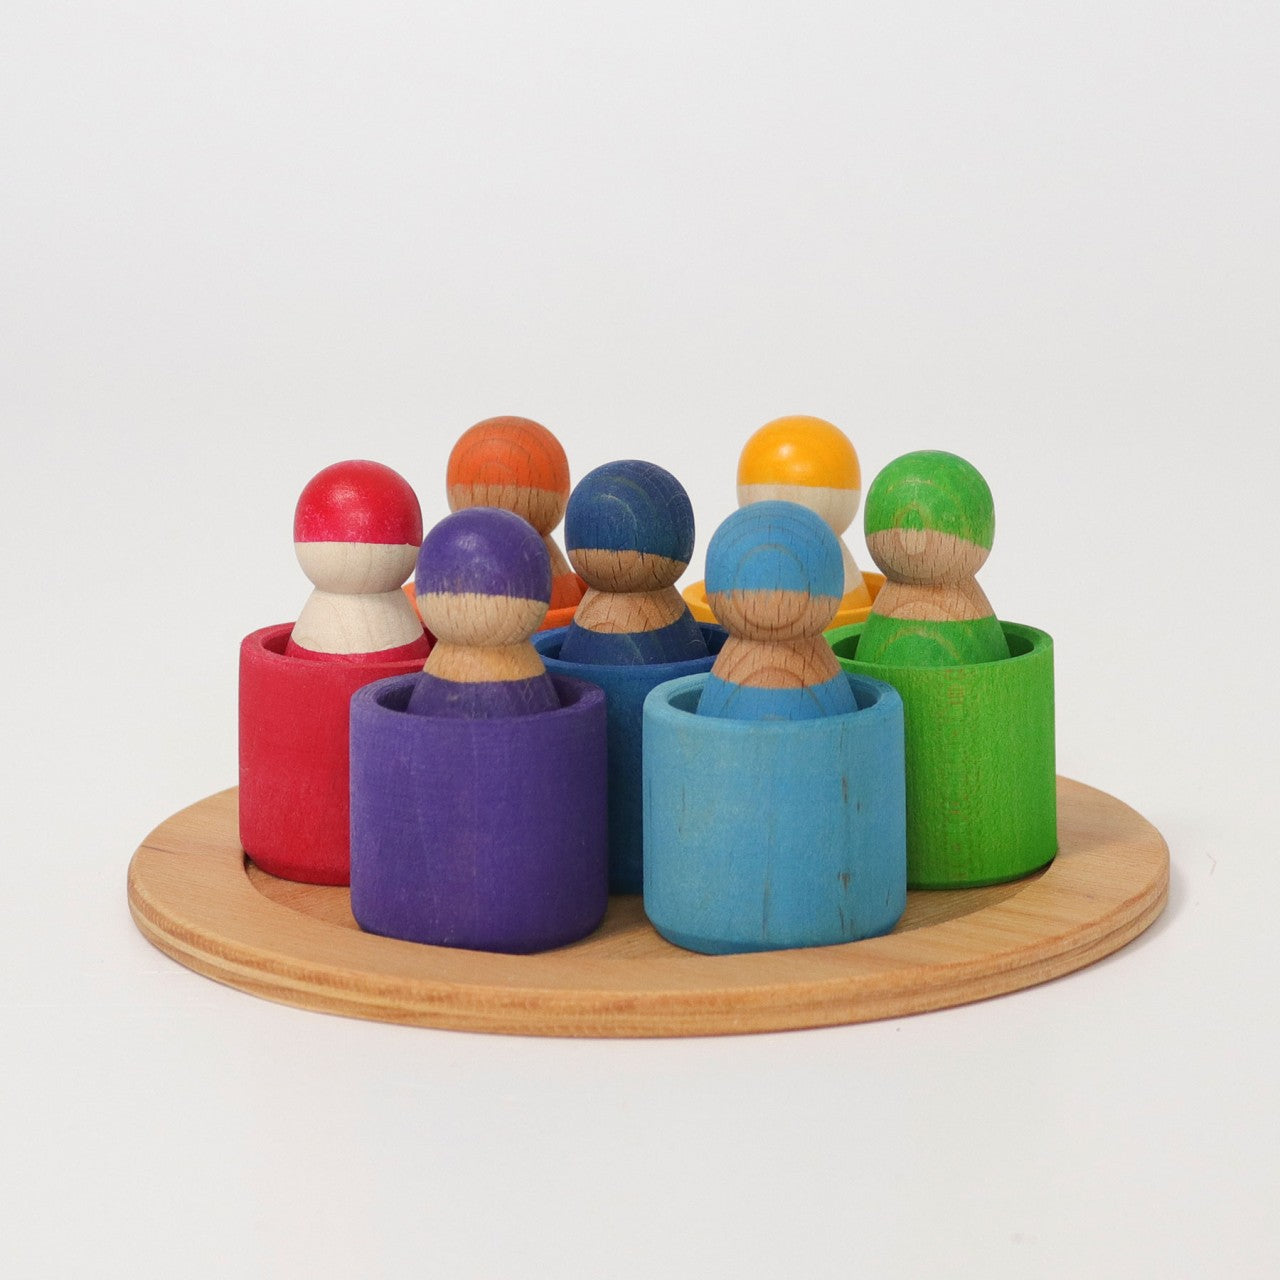 7 Rainbow Friends In Bowls | Wooden Toy Figures | Open-Ended Play